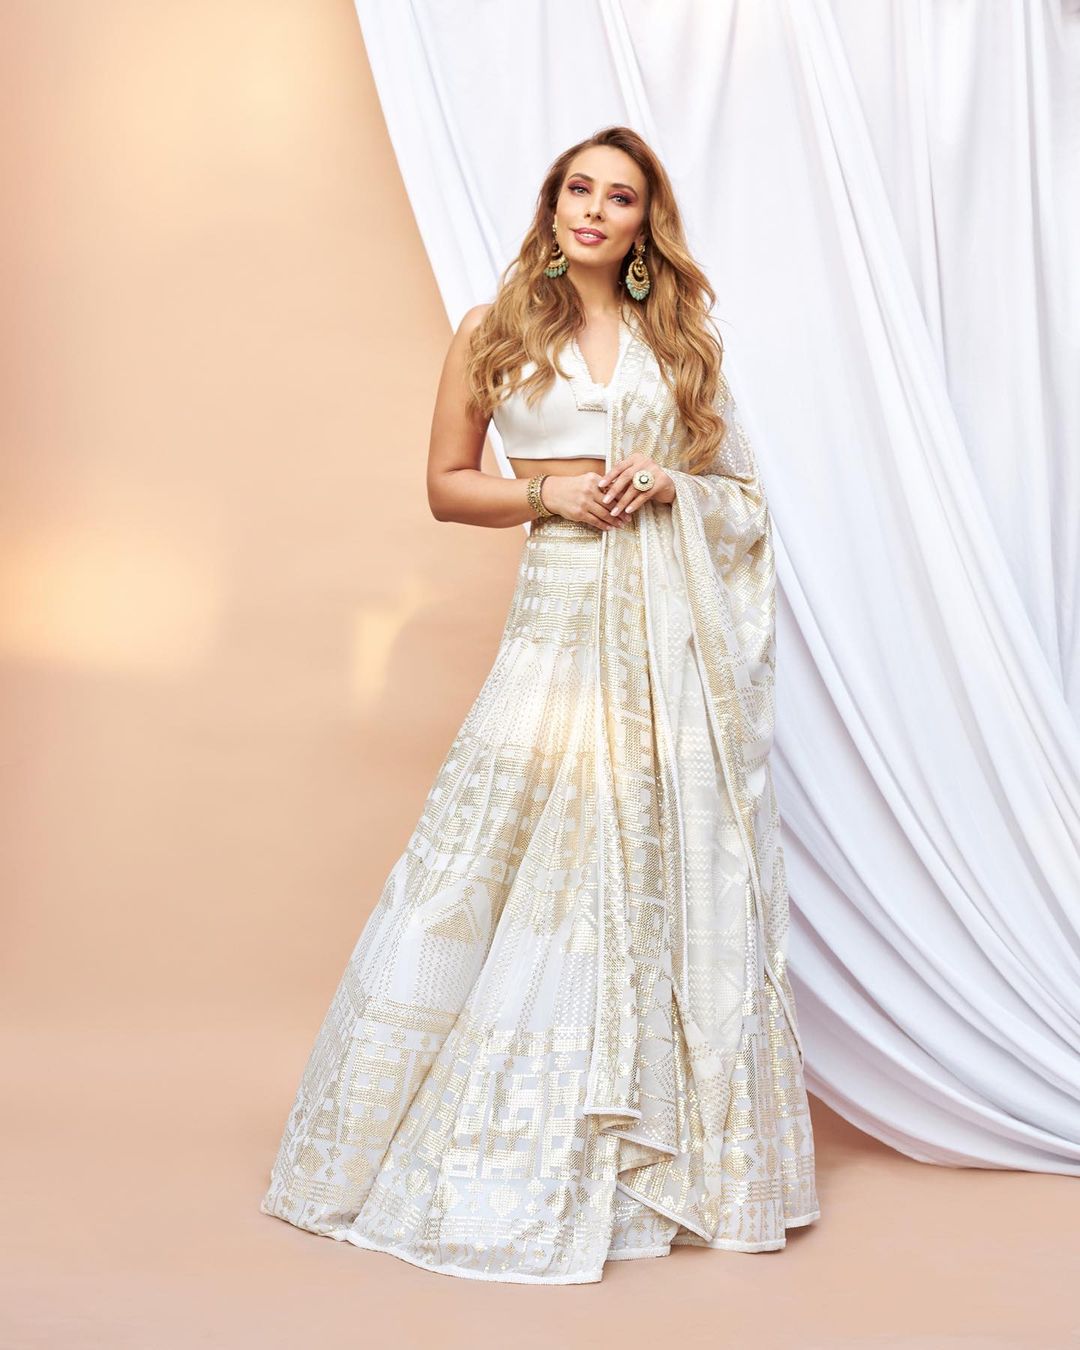 From traditional to western outfits, there is no attire Iulia cannot pull off. In this snap, lulia is seen rocking the white lehenga